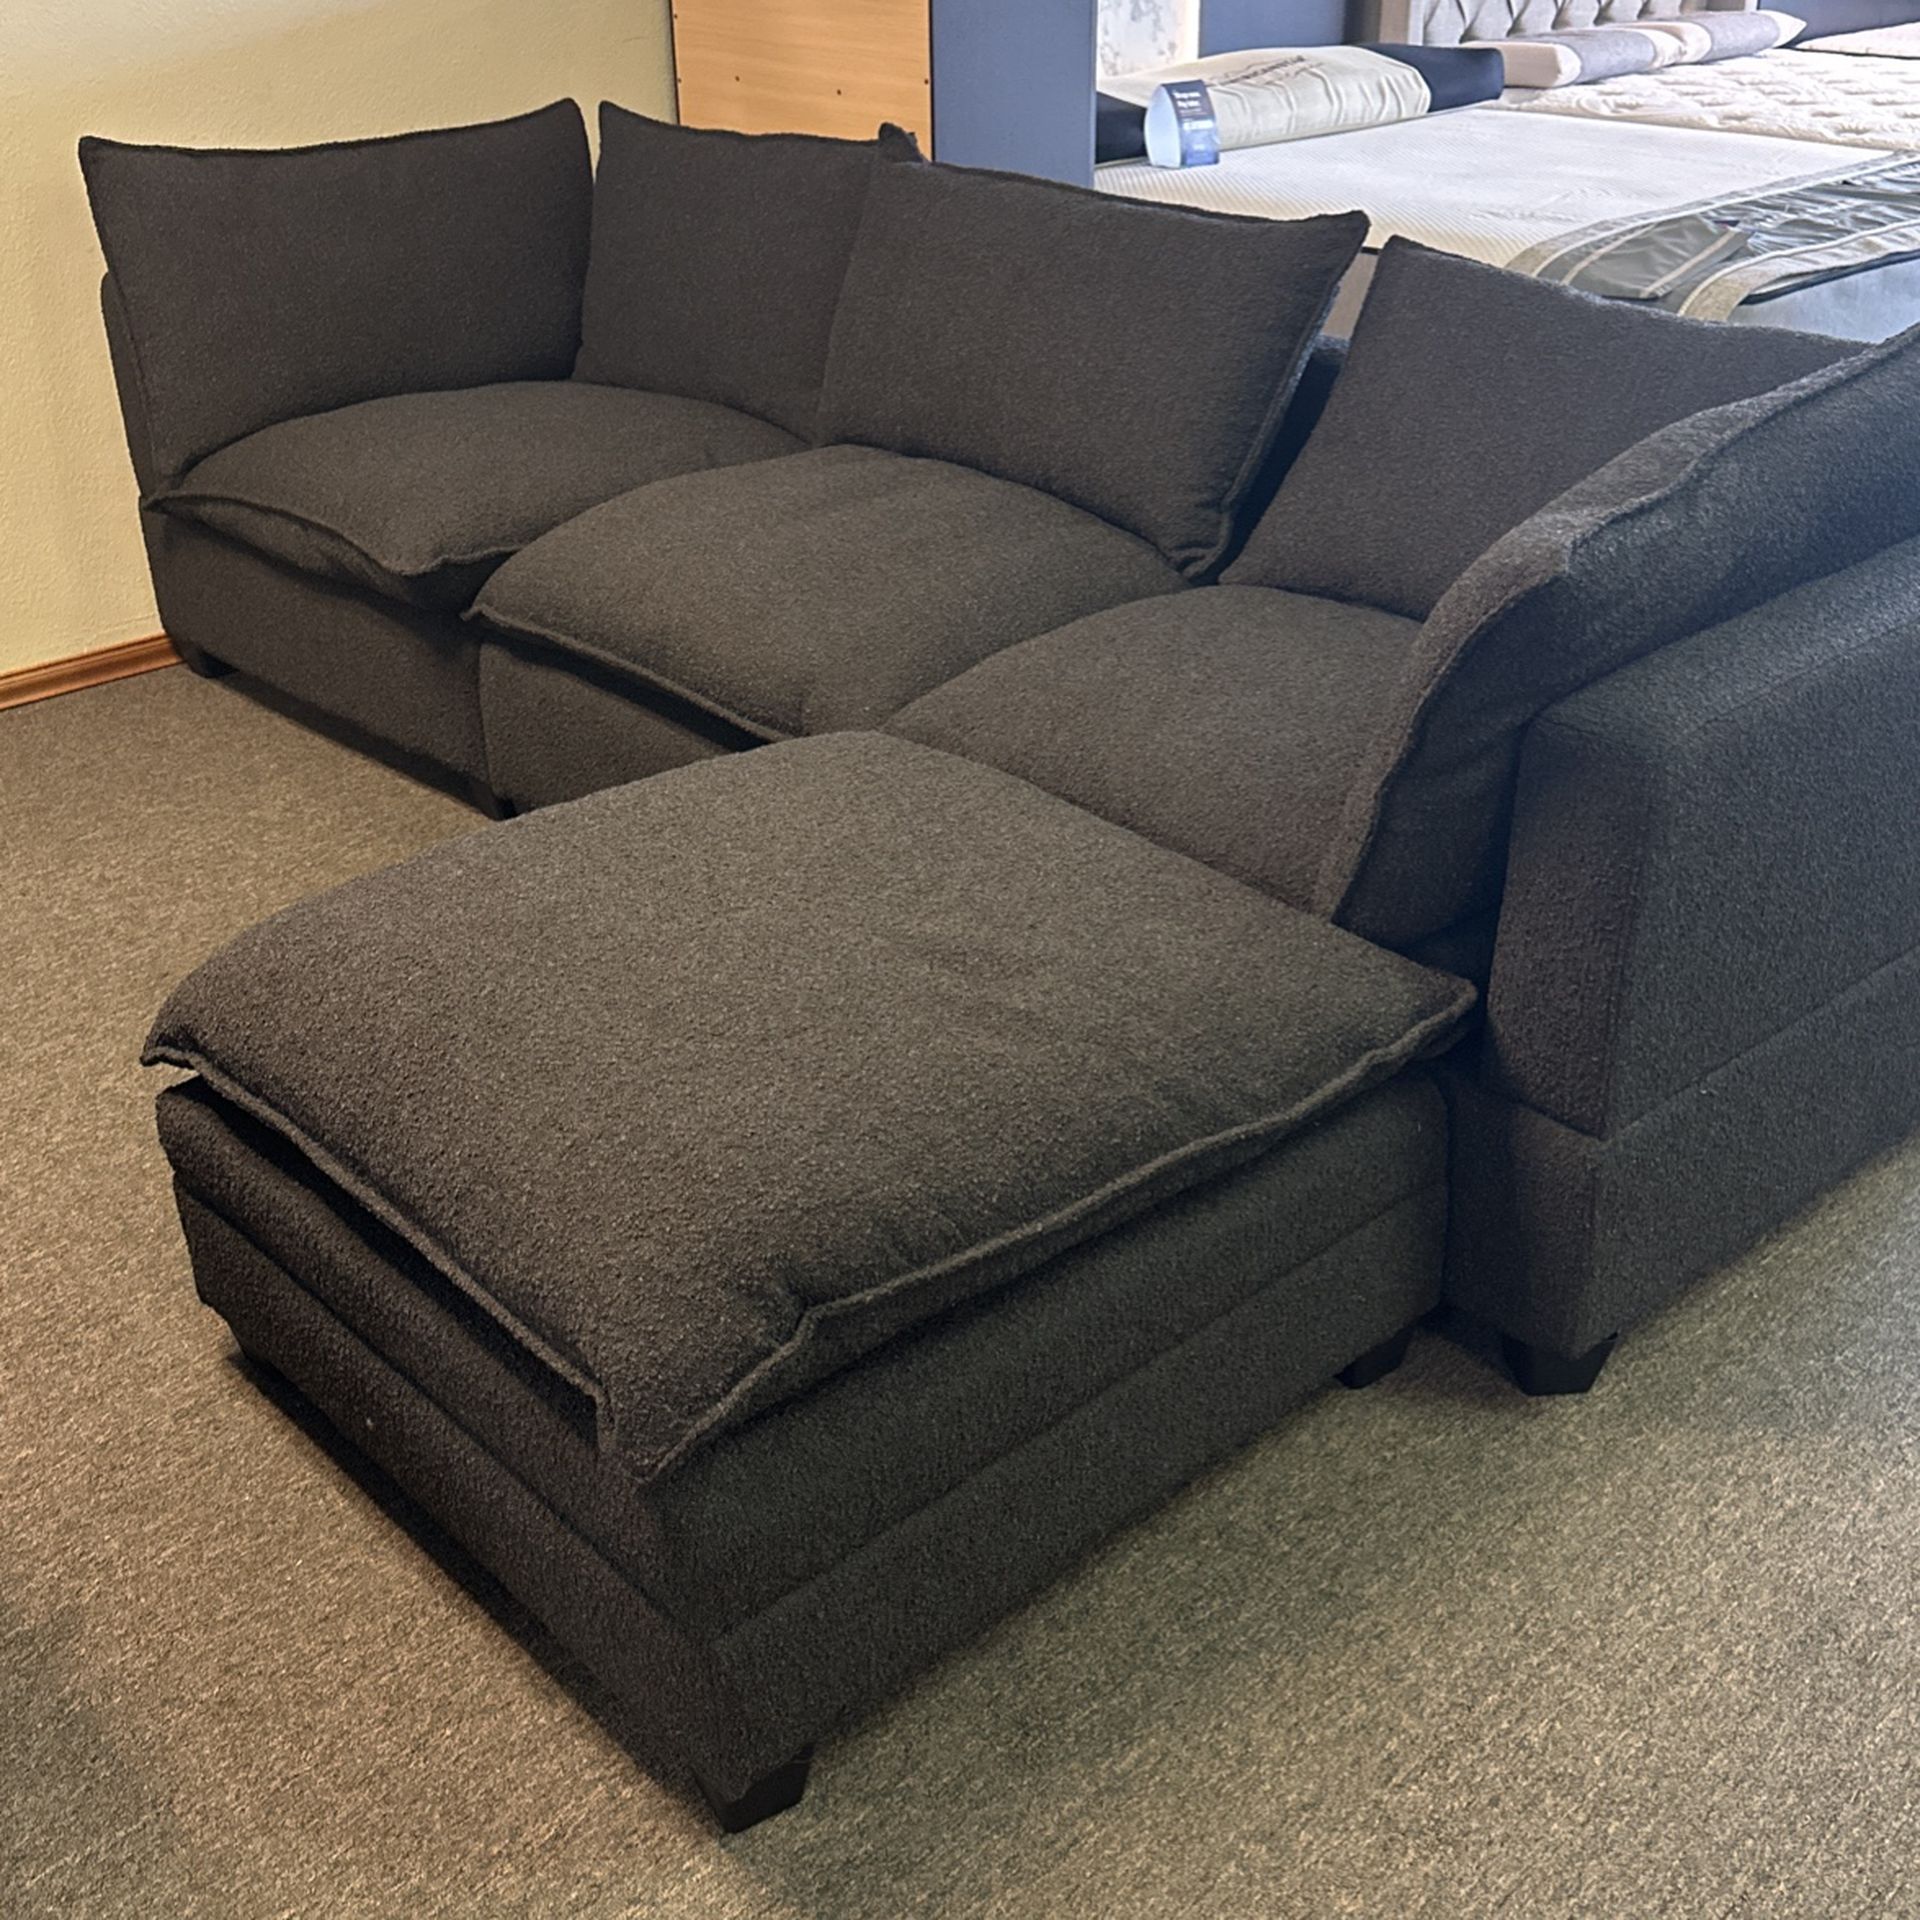 NEW BLACK CLOUD2 Fabric SECTIONAL WITH FREE DELIVERY SPECIAL FINANCING IS AVAILABLE 